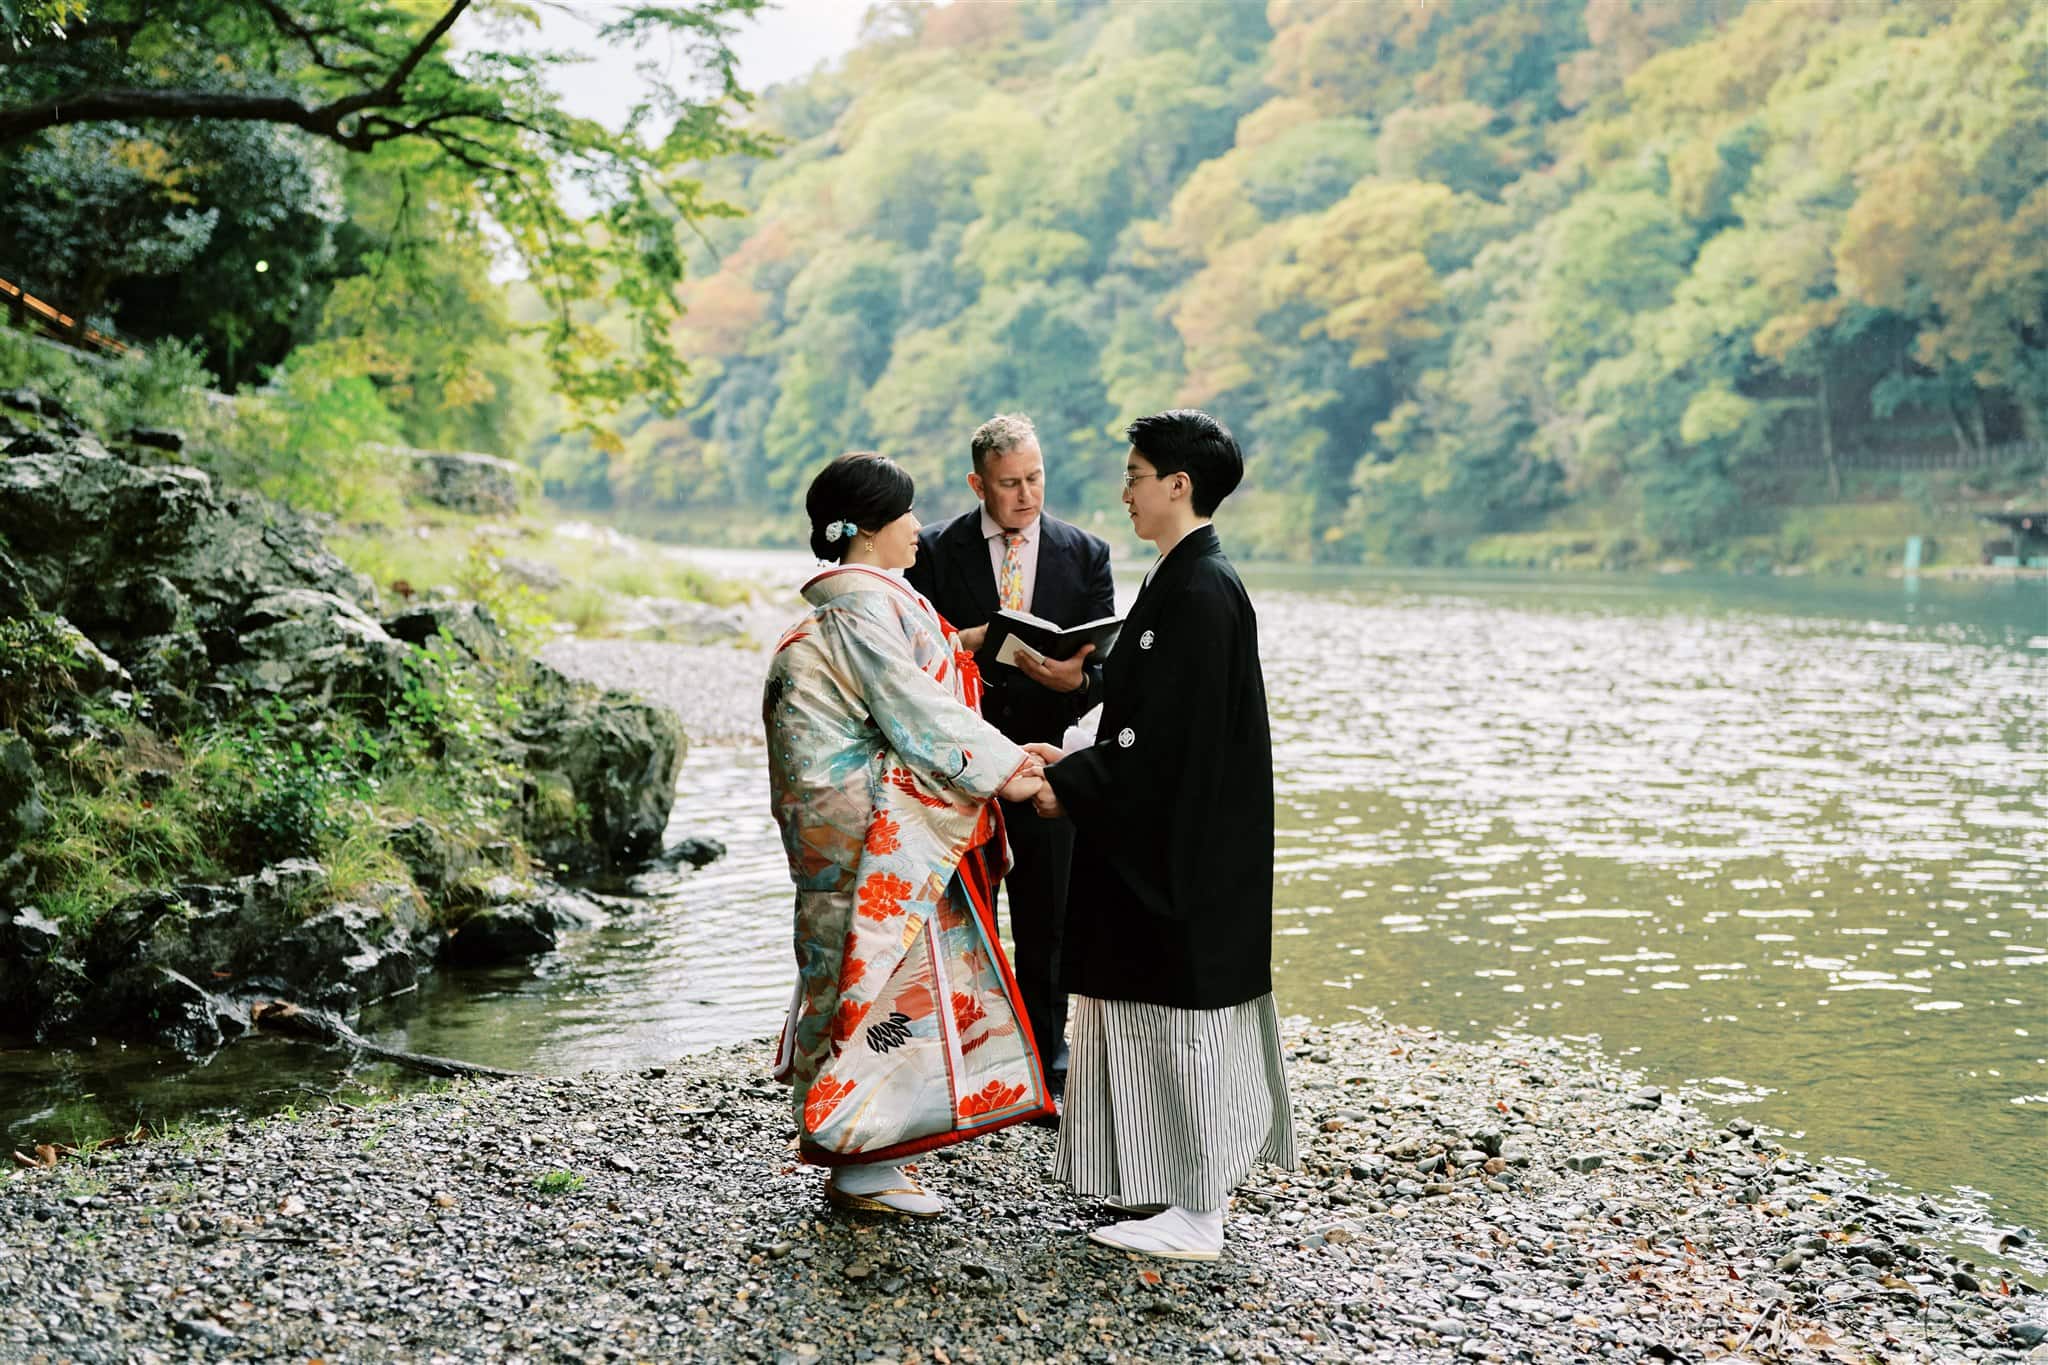 Kyoto Tokyo Japan Elopement Wedding Photographer, Planner & Videographer | Elopement Photographer capturing two people in kimono standing next to a river.